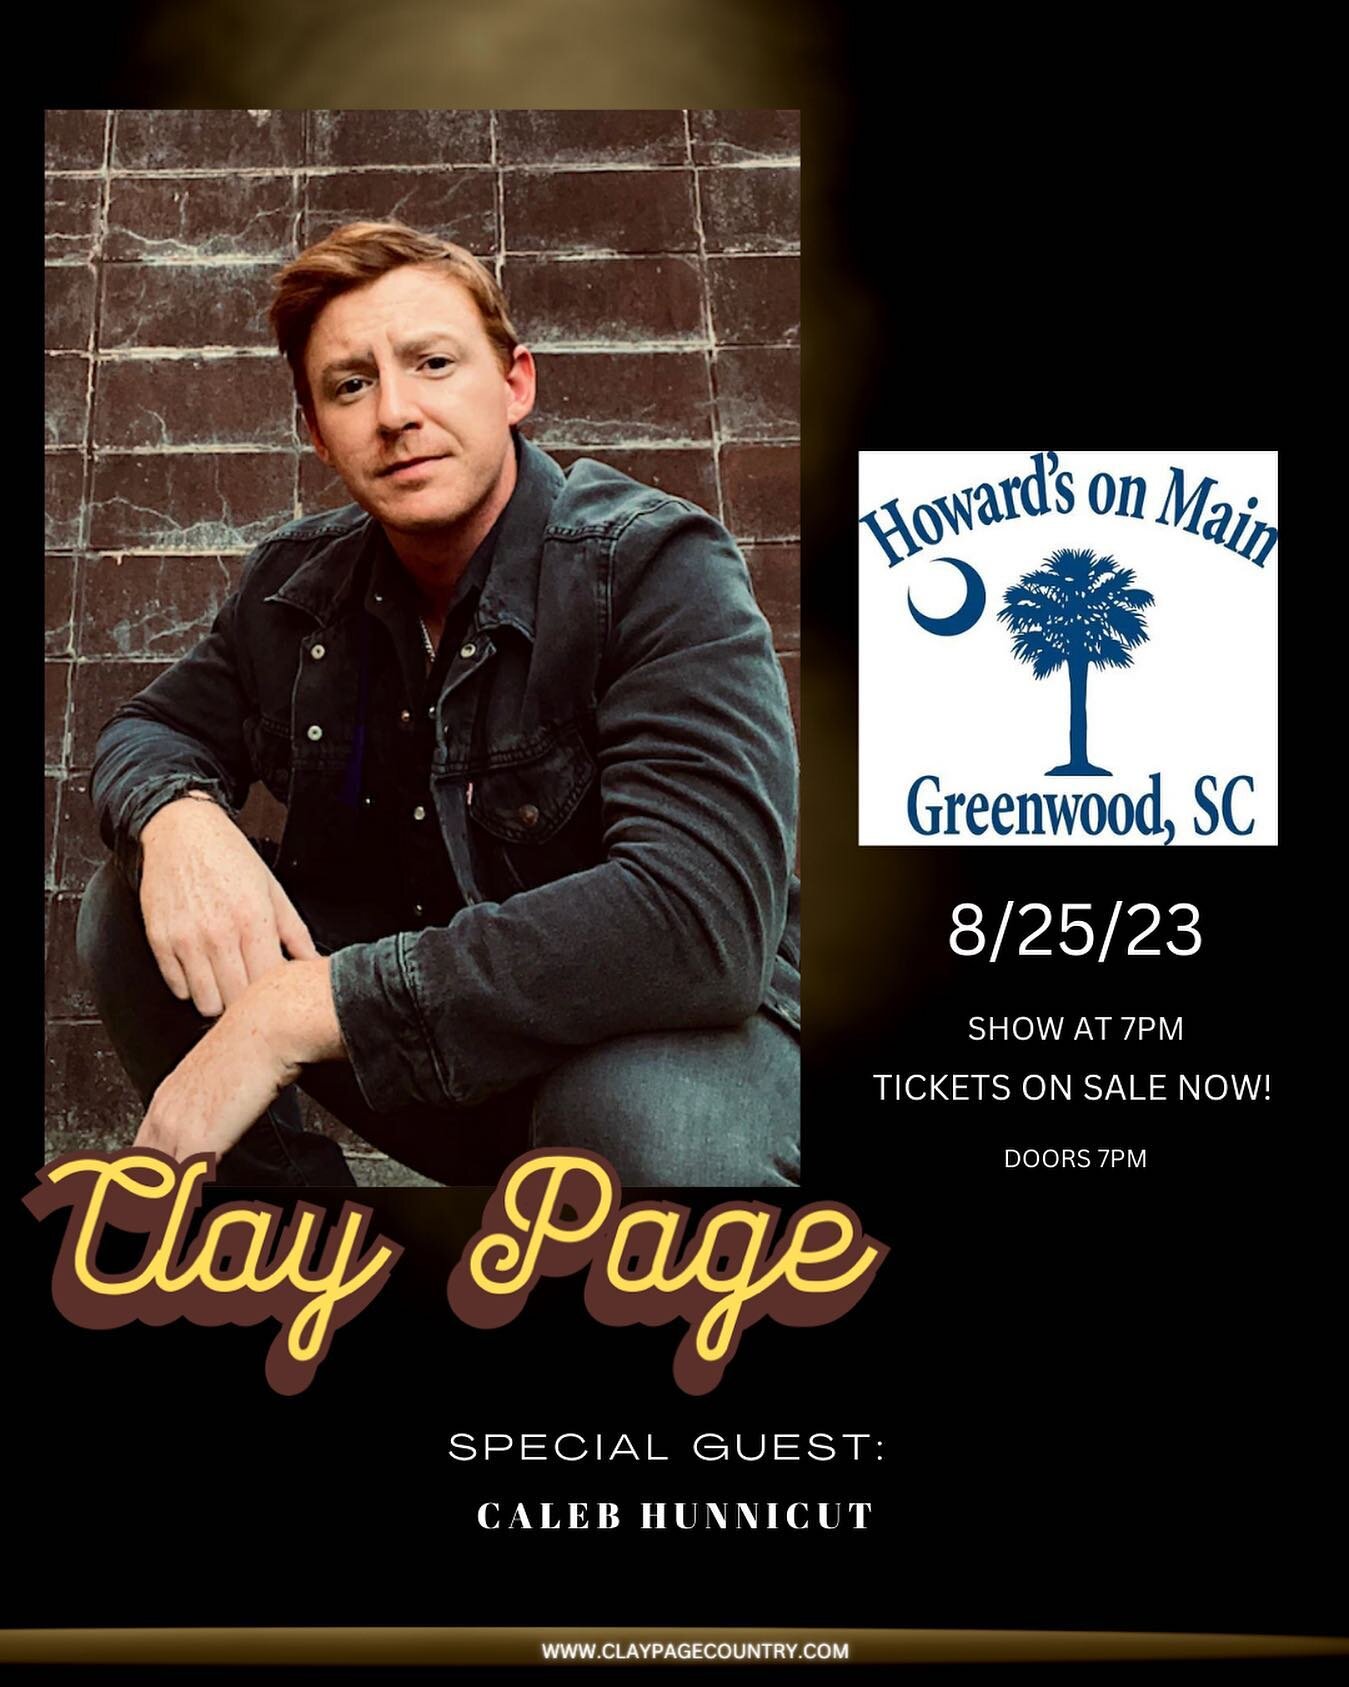 It&rsquo;s going down in uptown. See you 8/25 Greenwood! 🎙️⚡️Tickets available in my bio! 

#landeruniversity #greenwoodsc #countrymusic